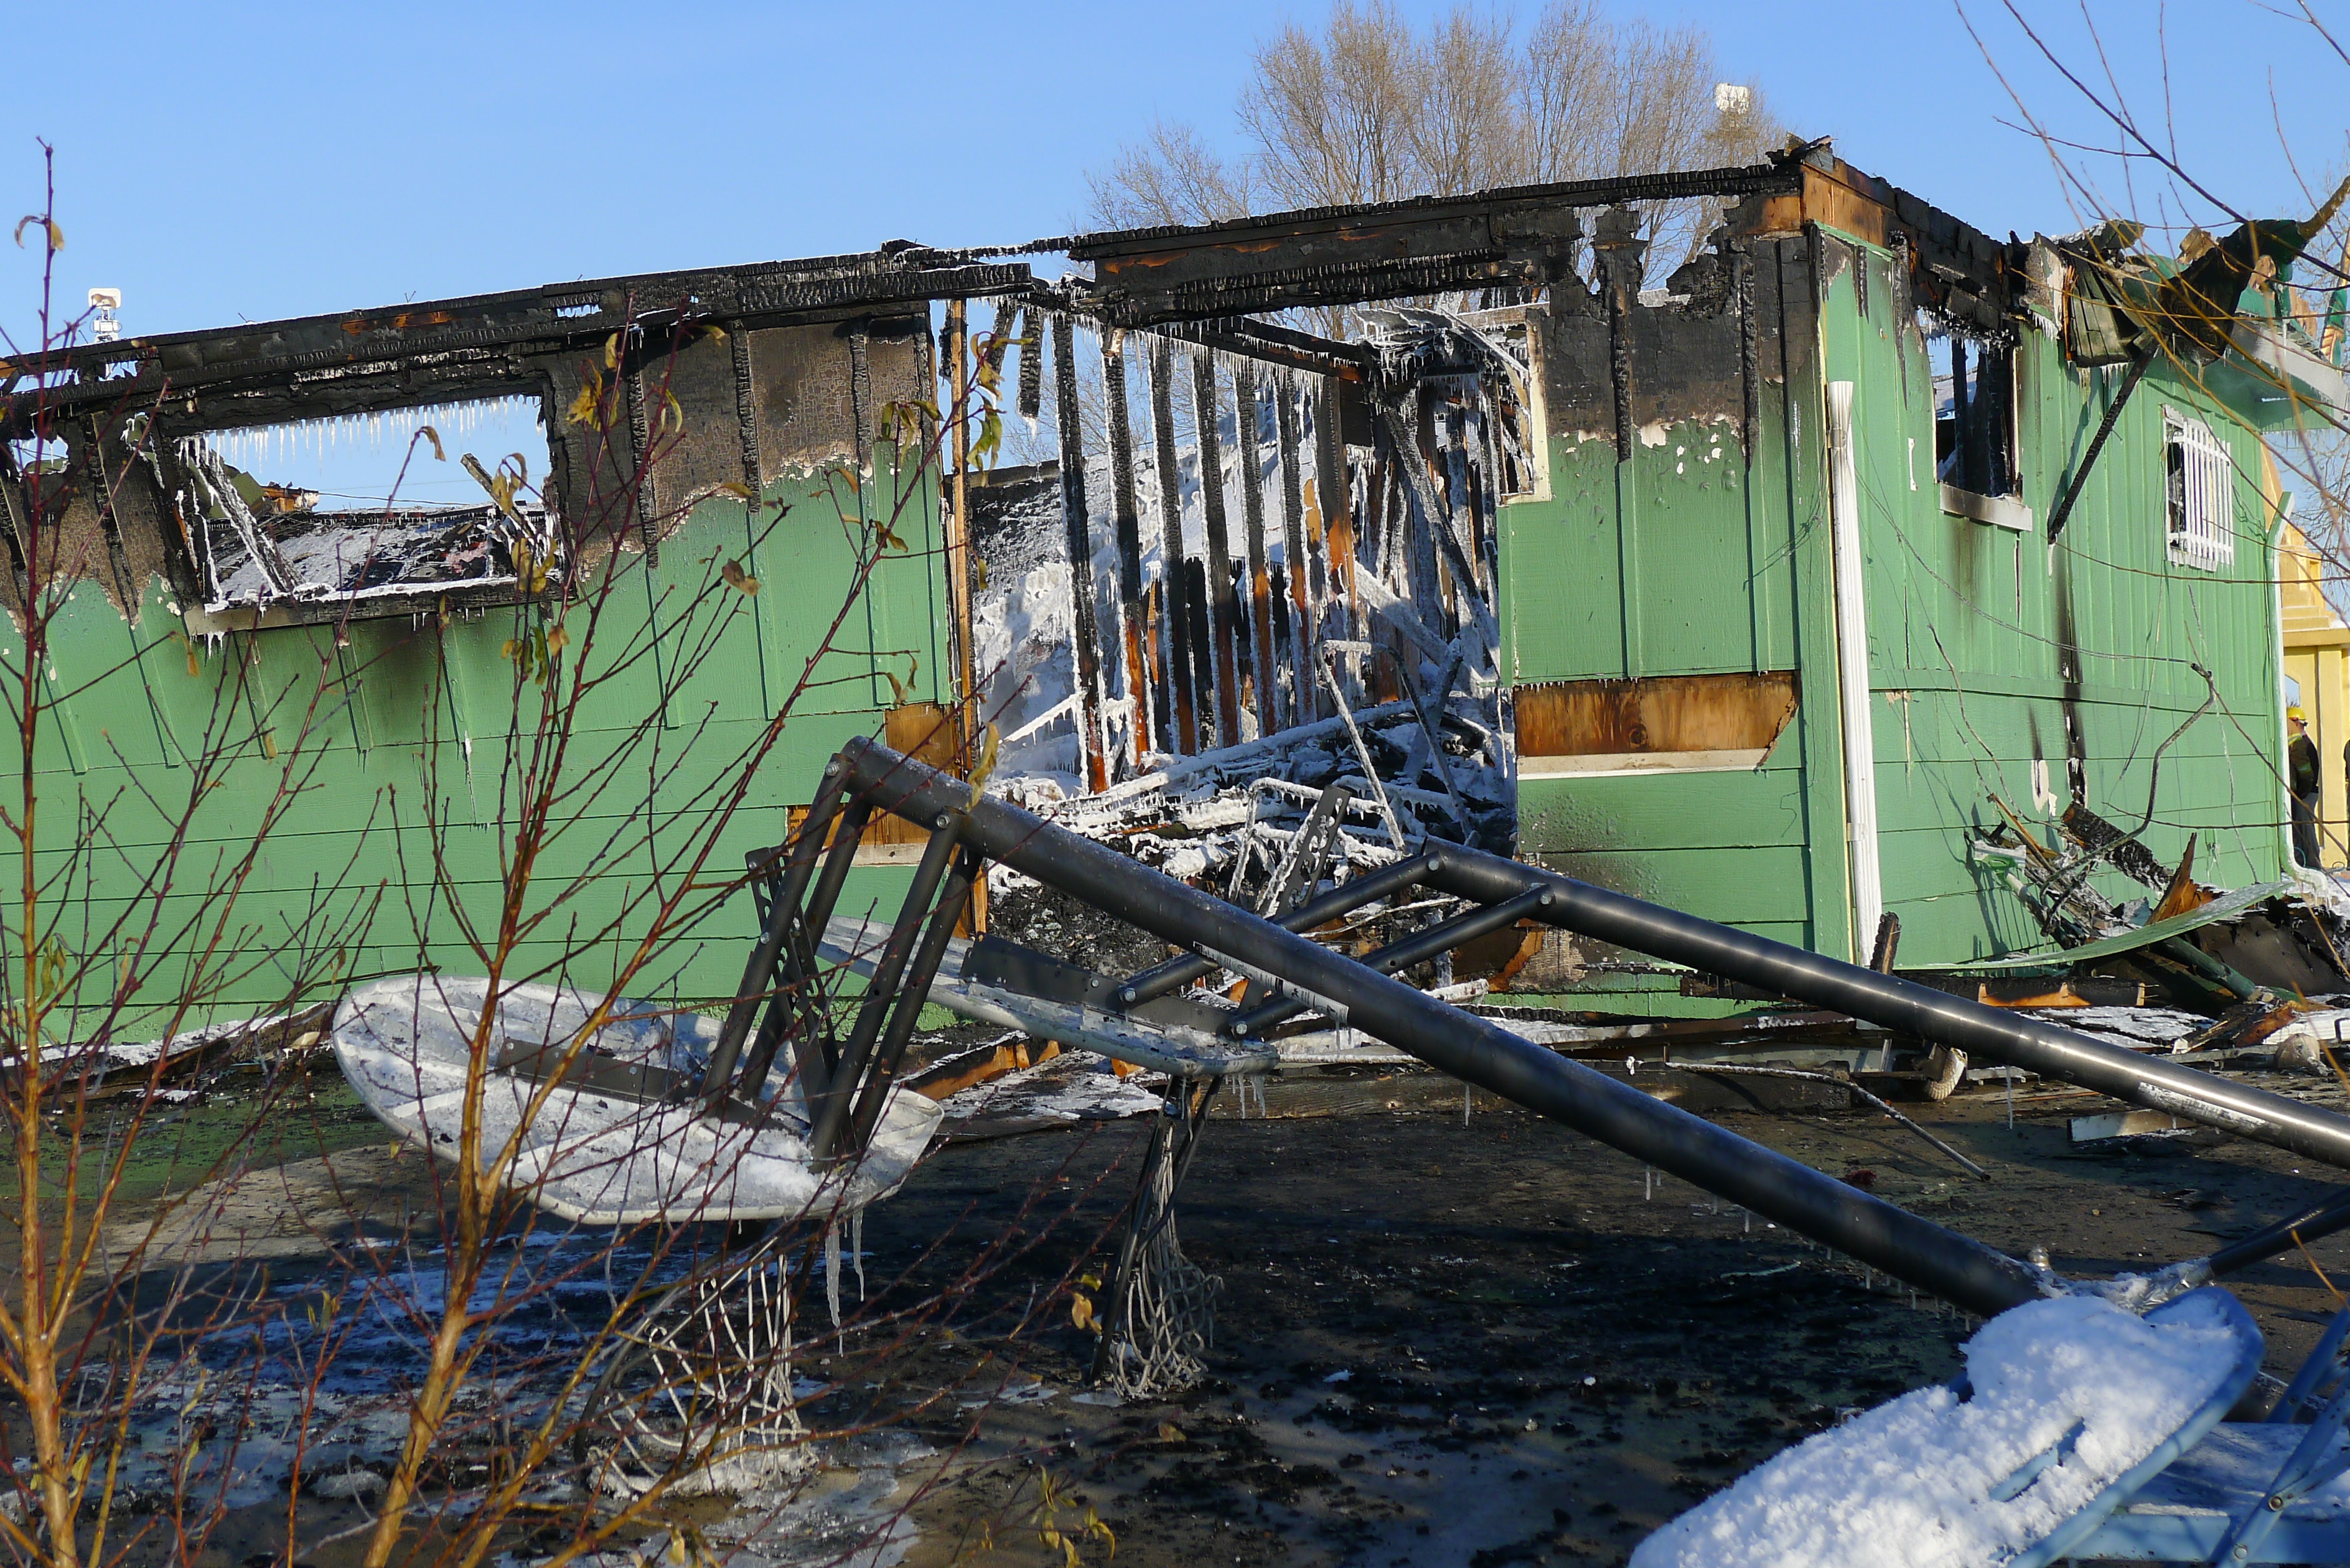 Lao Buddhist Temple of Colorado after the Dec.6 fire.